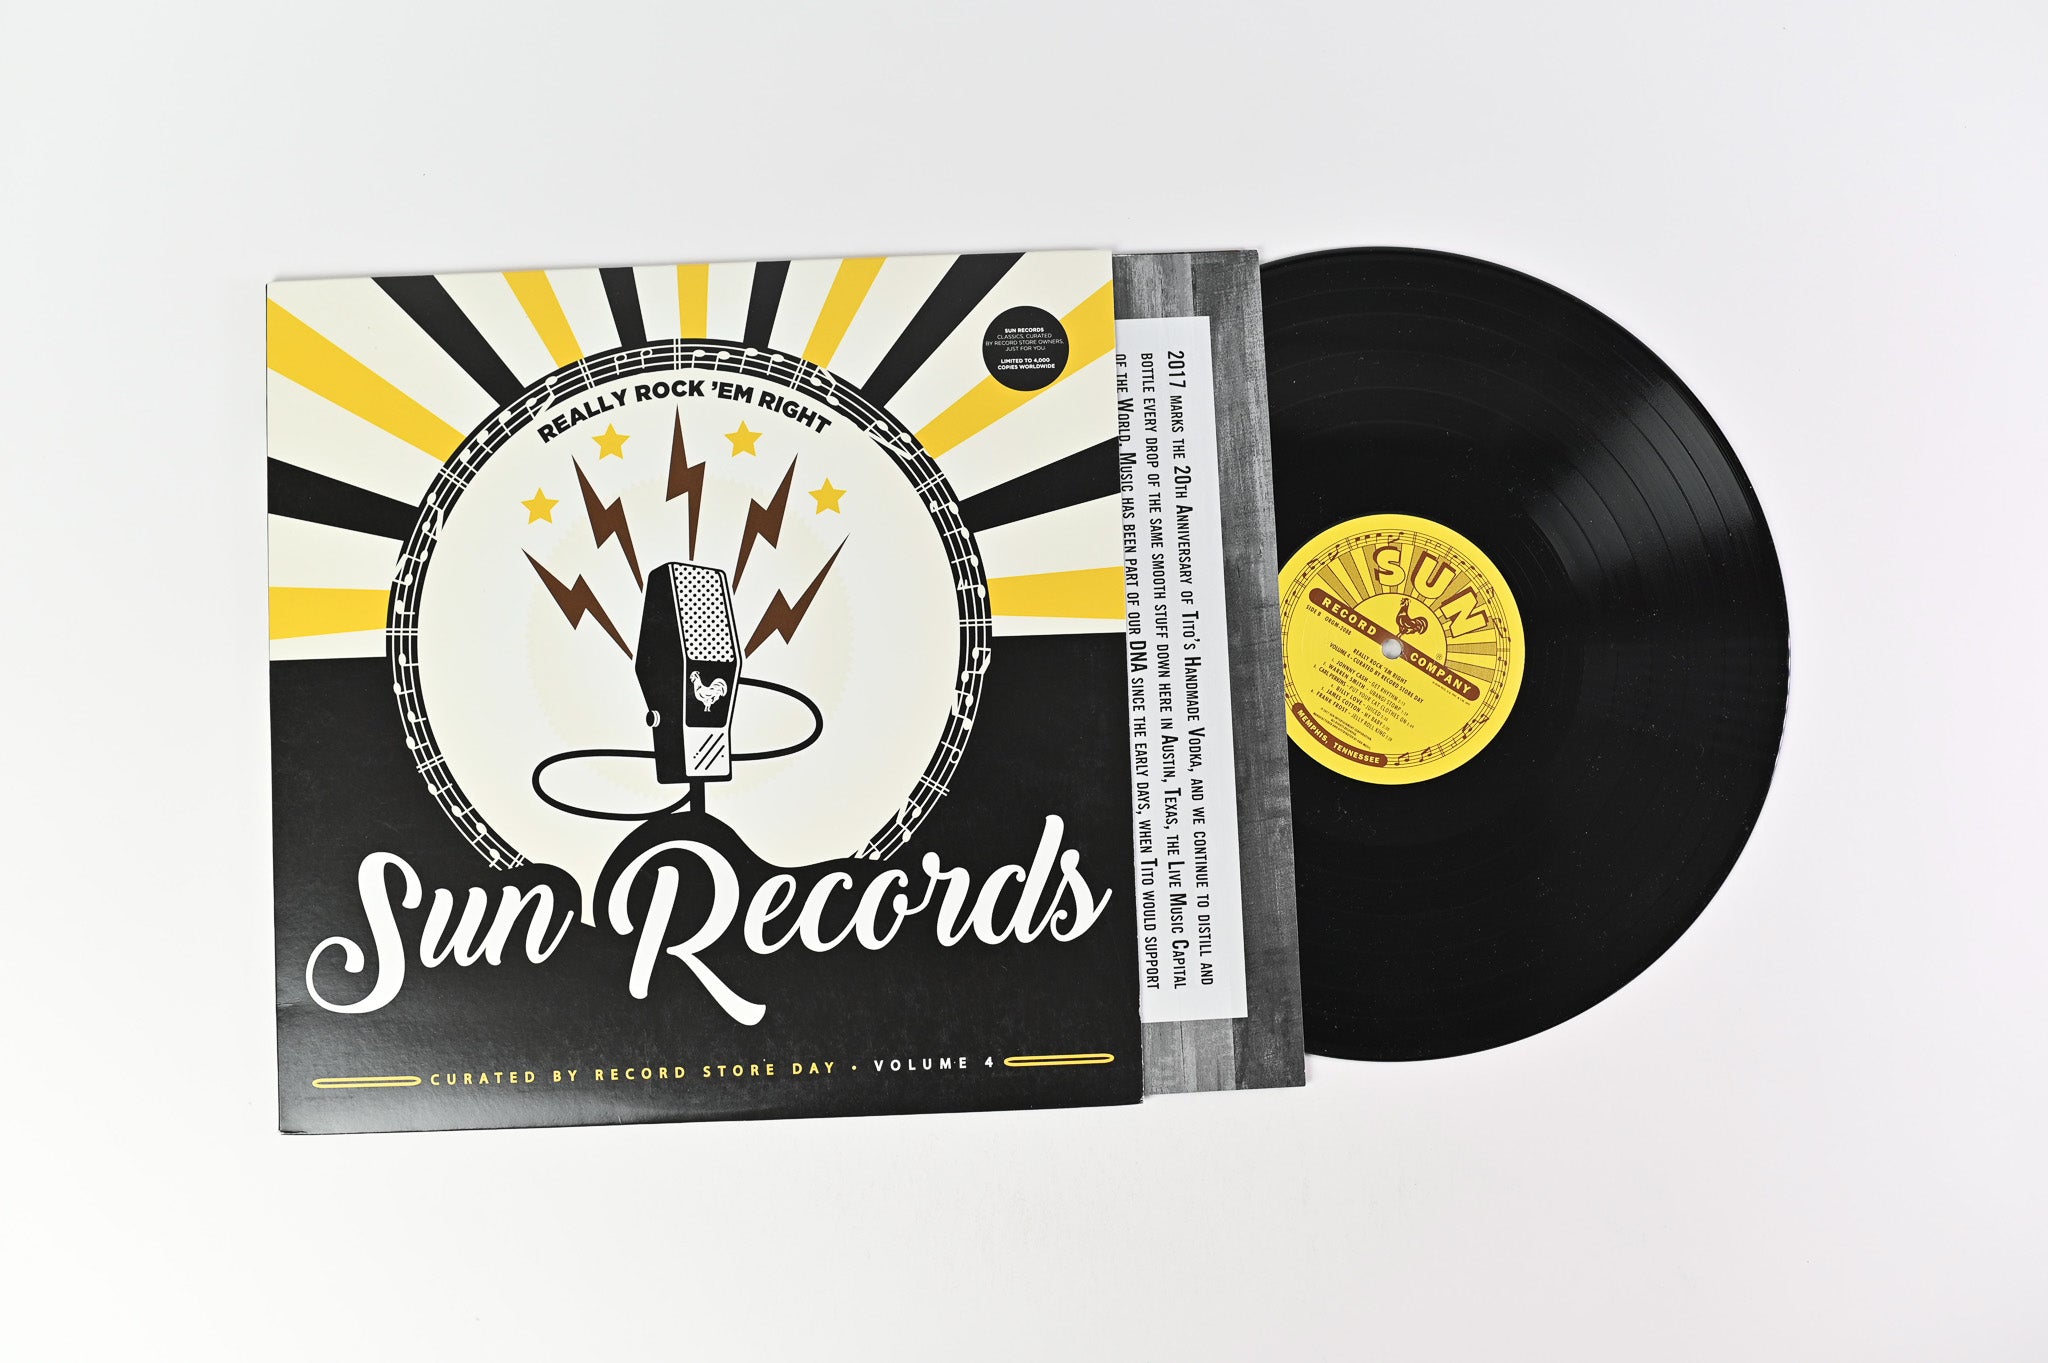 Various - Really Rock 'em Right - Sun Records Curated By Record Store Day Volume 4 on Sun Records